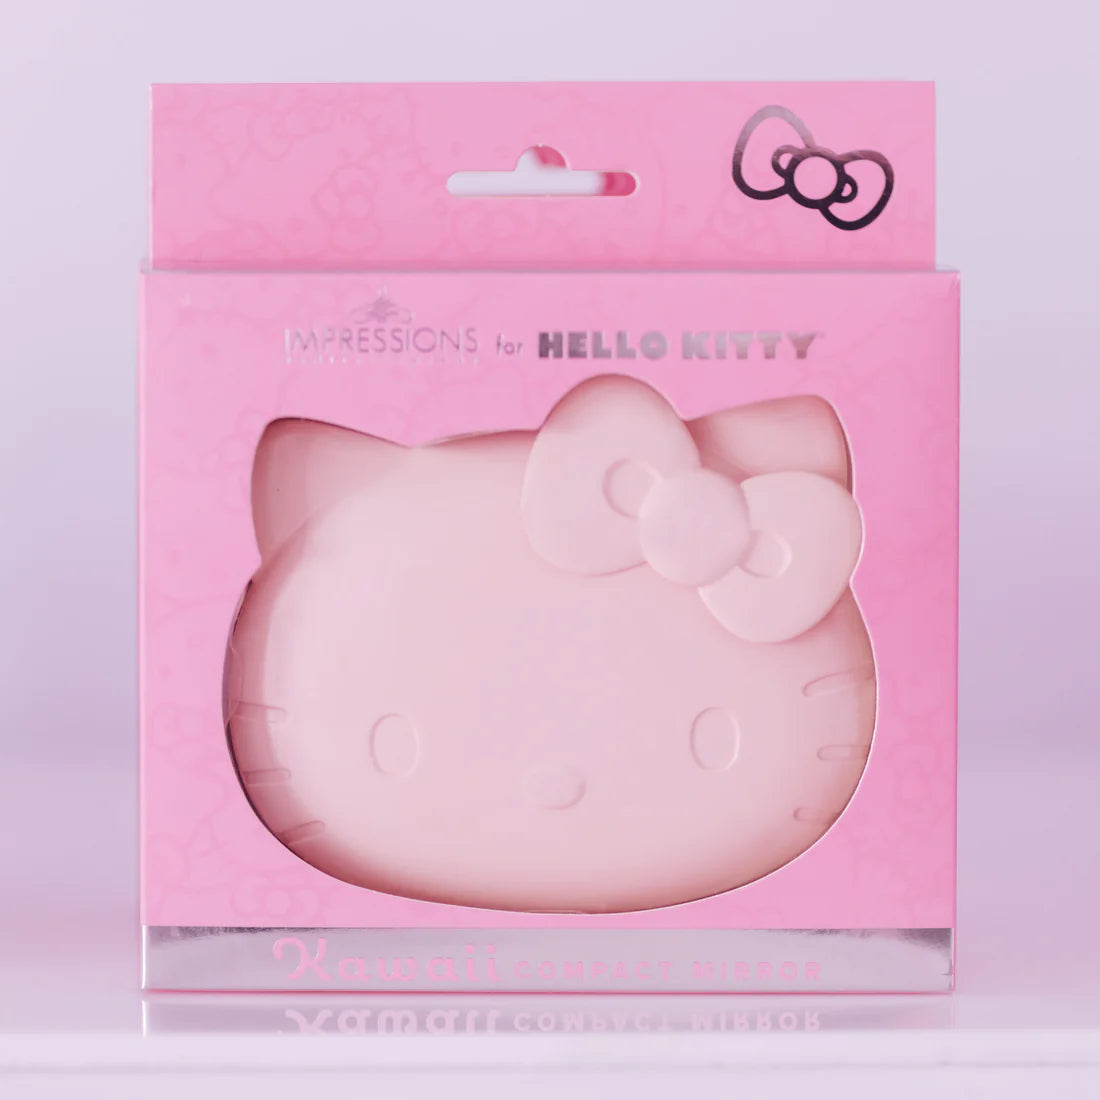 Impressions Vanity - Hello Kitty Kawaii Battery Compact Mirror with Special Finish